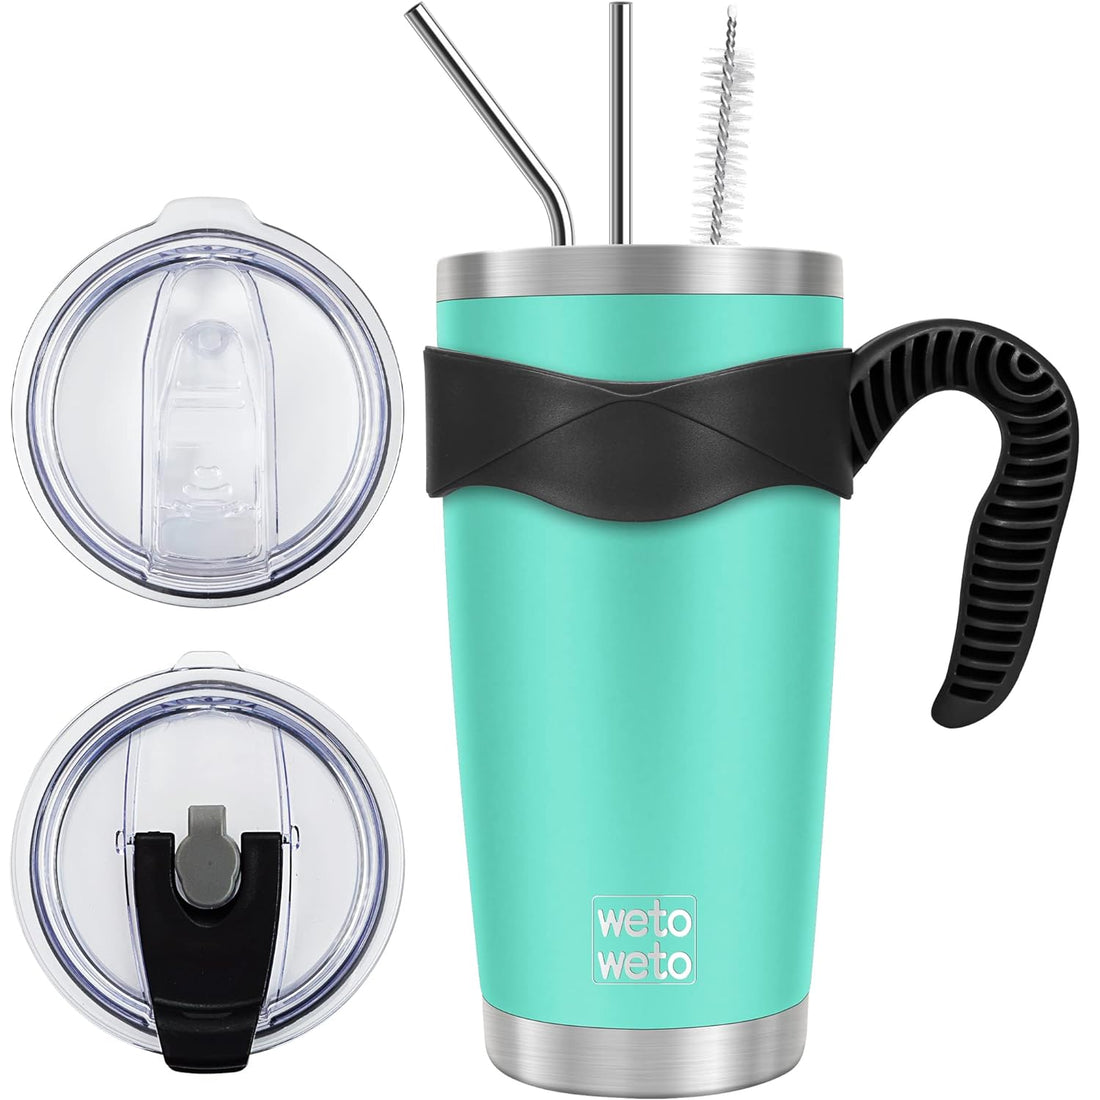 WETOWETO 20oz Tumbler with 2 lids and 2 straws, Stainless Steel Vacuum Insulated Coffee Tumbler Cup, Double Wall Powder Coated Travel Mug (Cyan, 1 Pack)